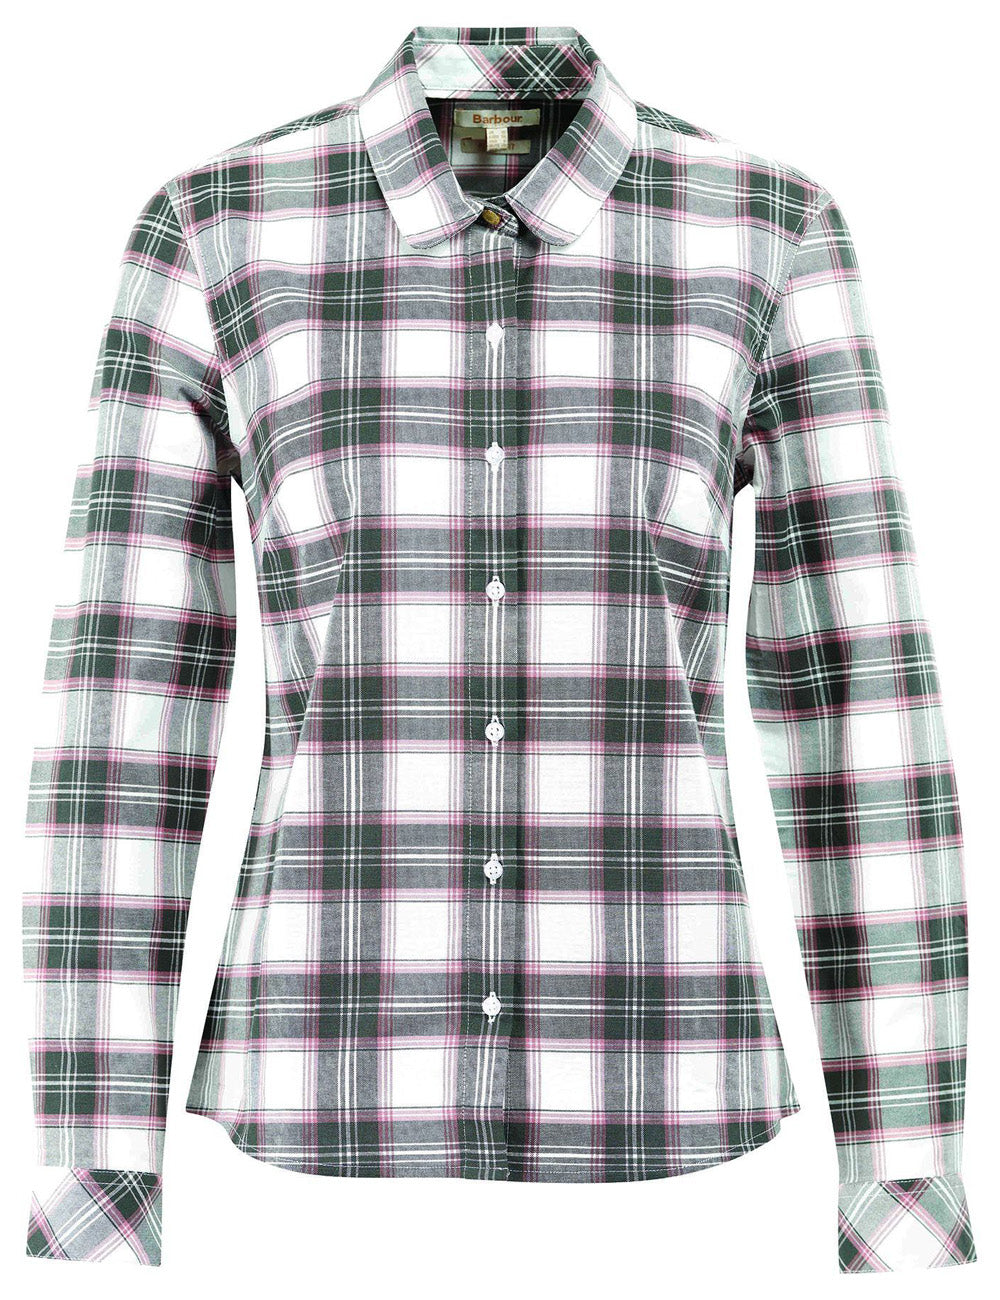 Barbour's Daphne Shirt on a white background